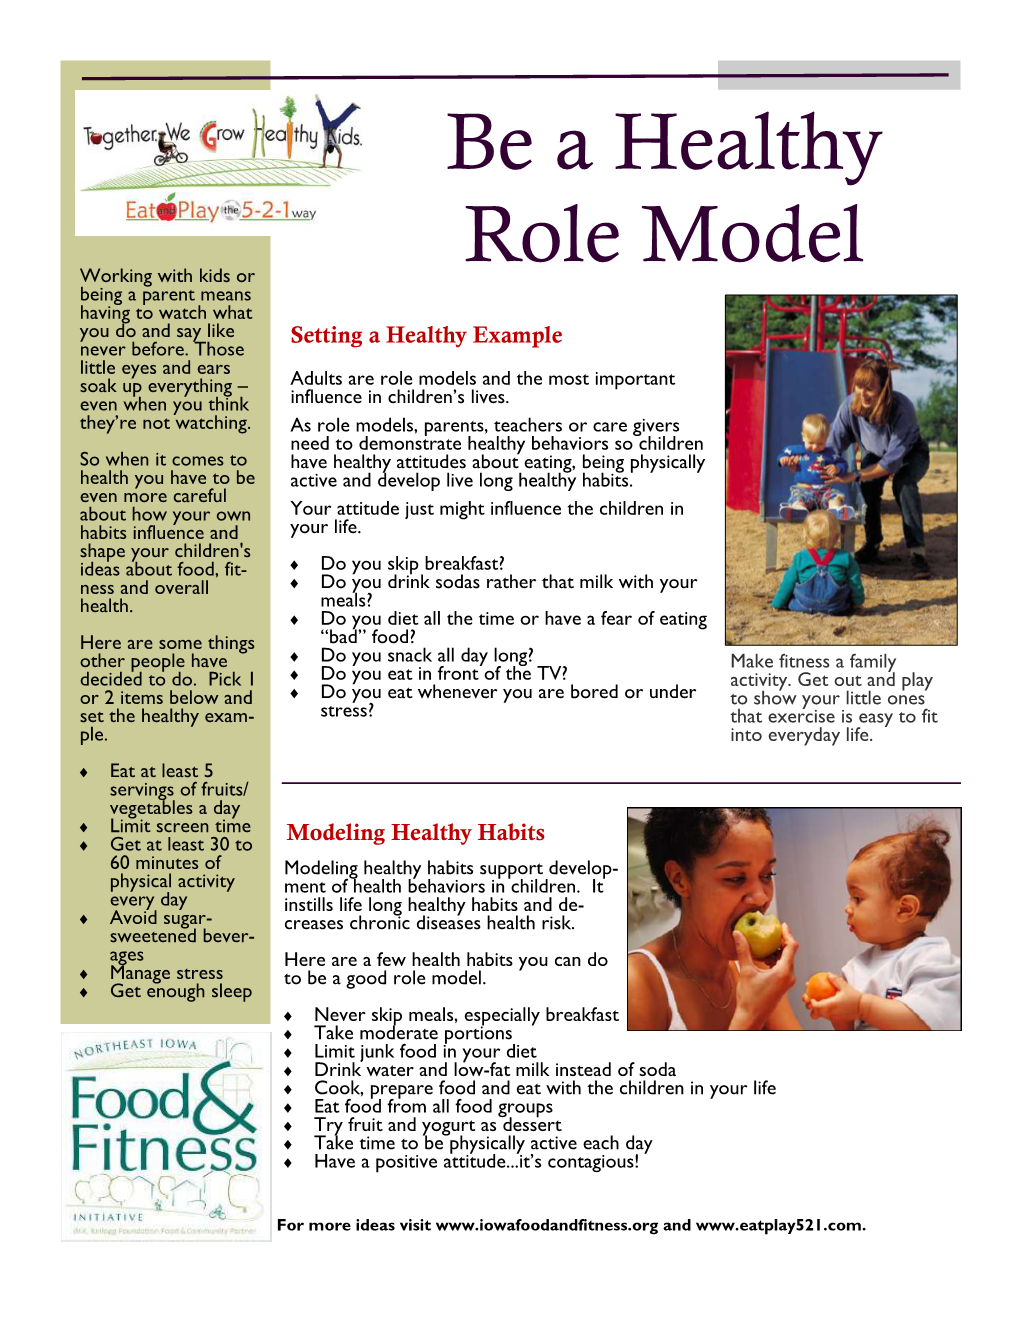 Be a Healthy Role Model